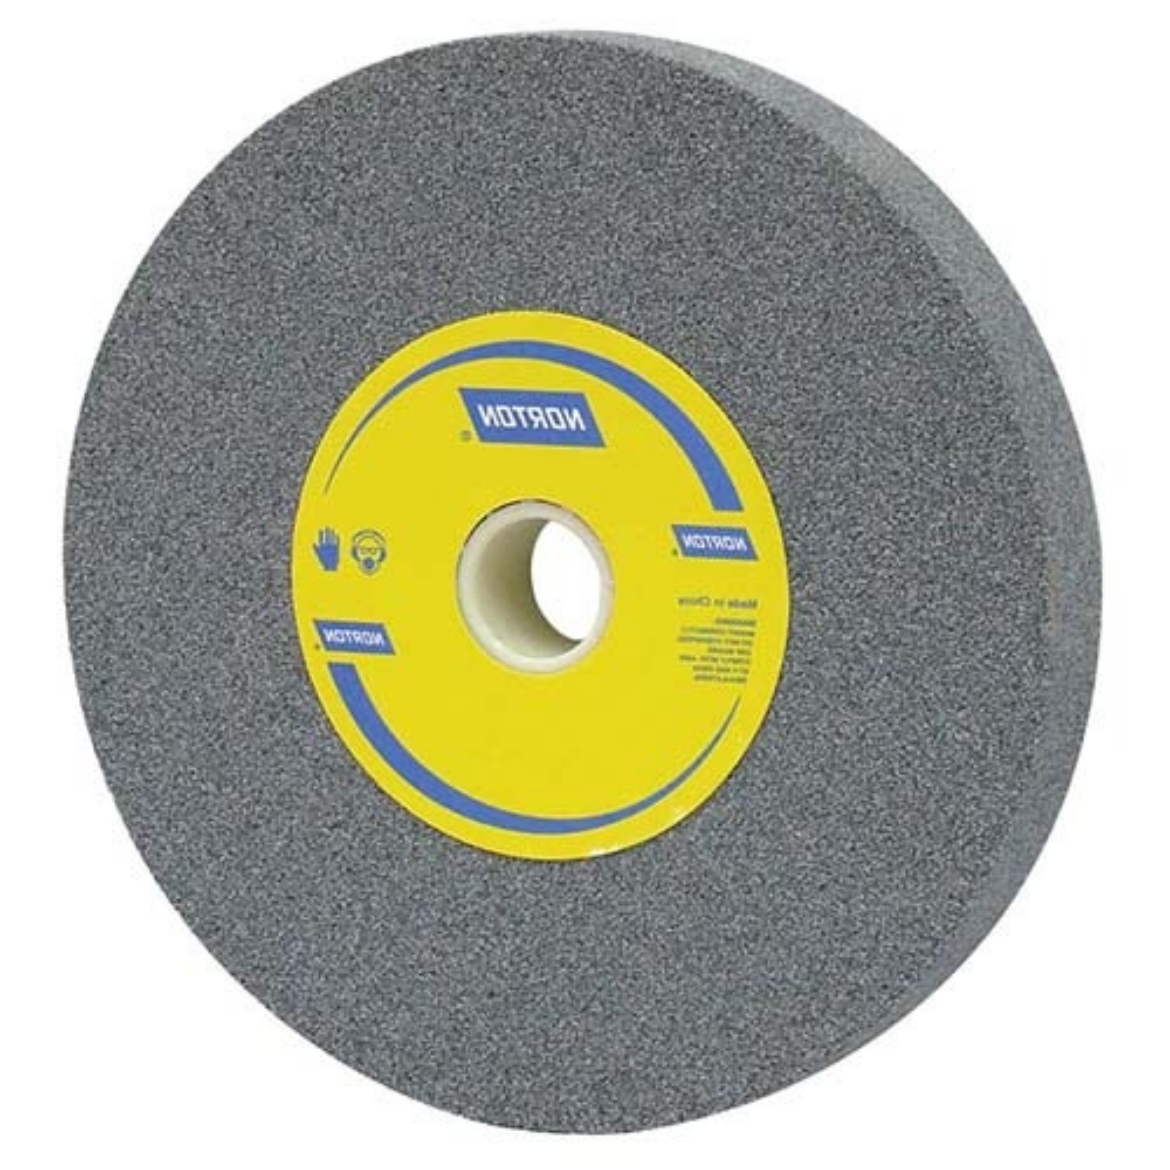 Picture of GRINDING WHEEL 200x40xMULTI BORE A60MVBE MED/FINE GENERAL PURPOSE BENCH/PEDESTAL GRINDING WHEELS TYPE 1 ALUMINIUM OXIDE